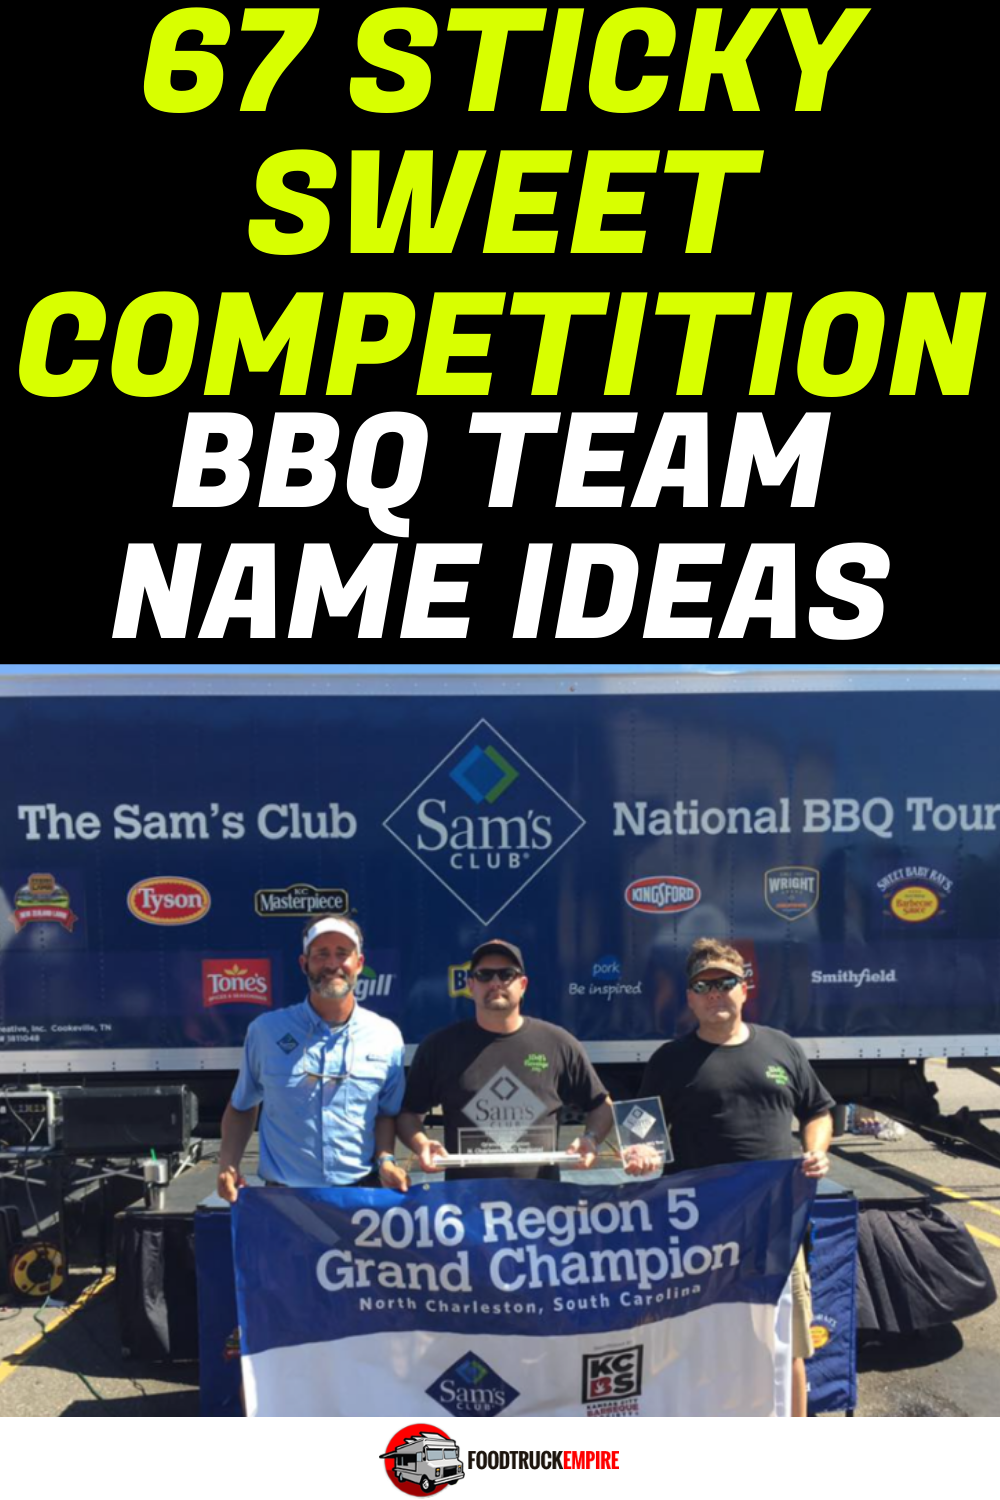 67 Sticky Sweet Competition BBQ Team Name Ideas